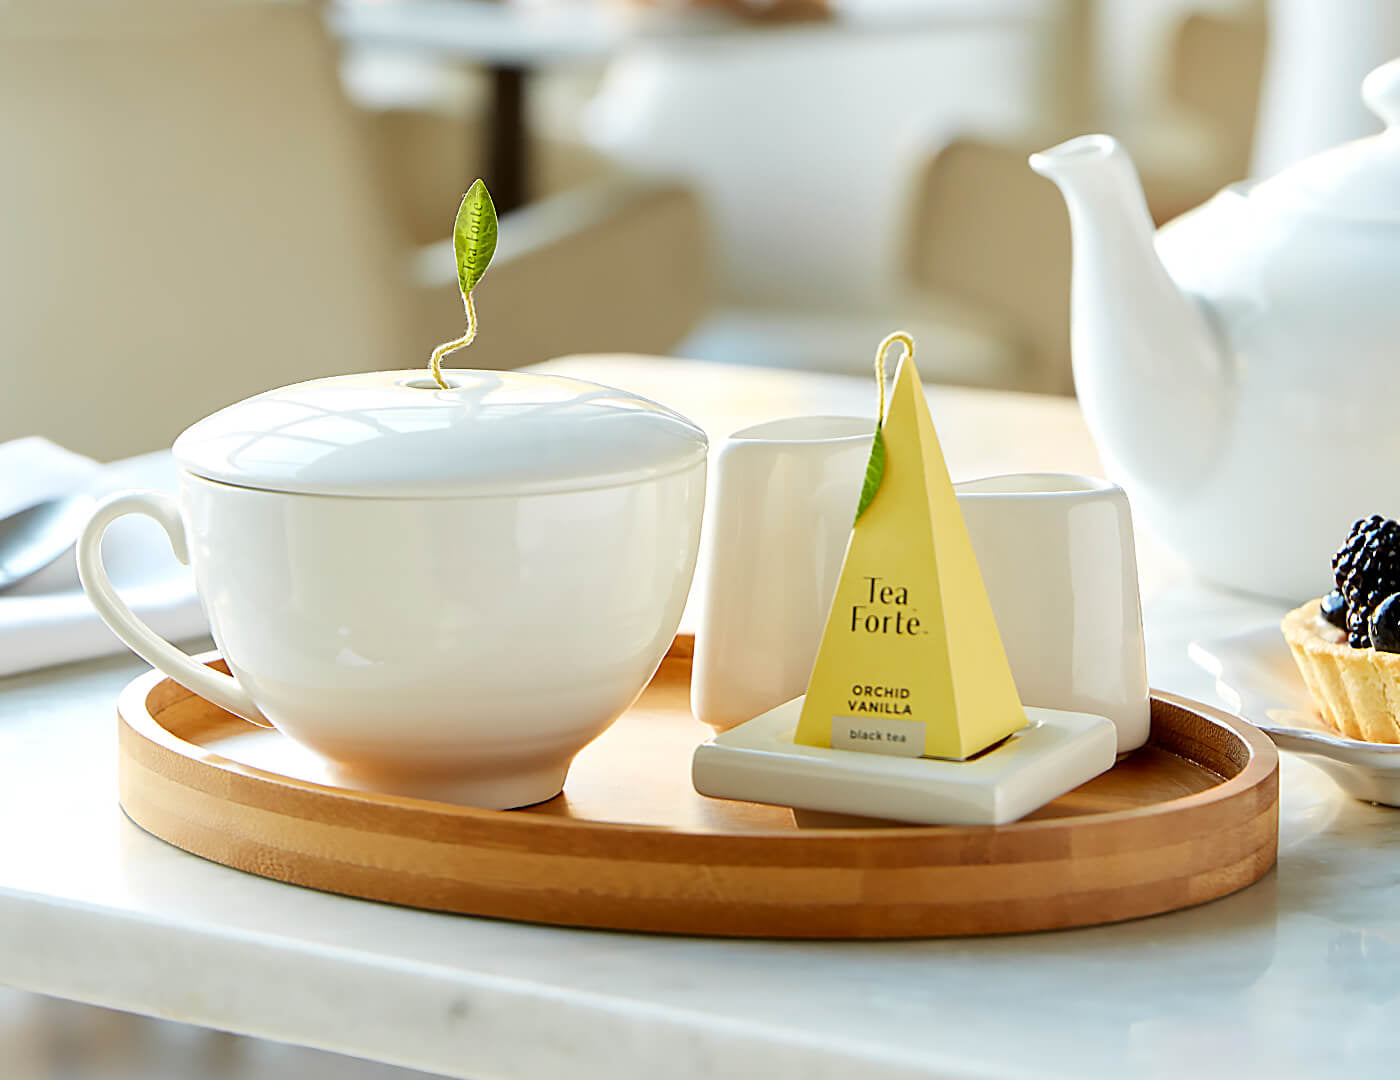 Café Cup in Bone White in a café setting on a Oval Bamboo Tray with infuser, Tea Tray and Sugar & Creamer.